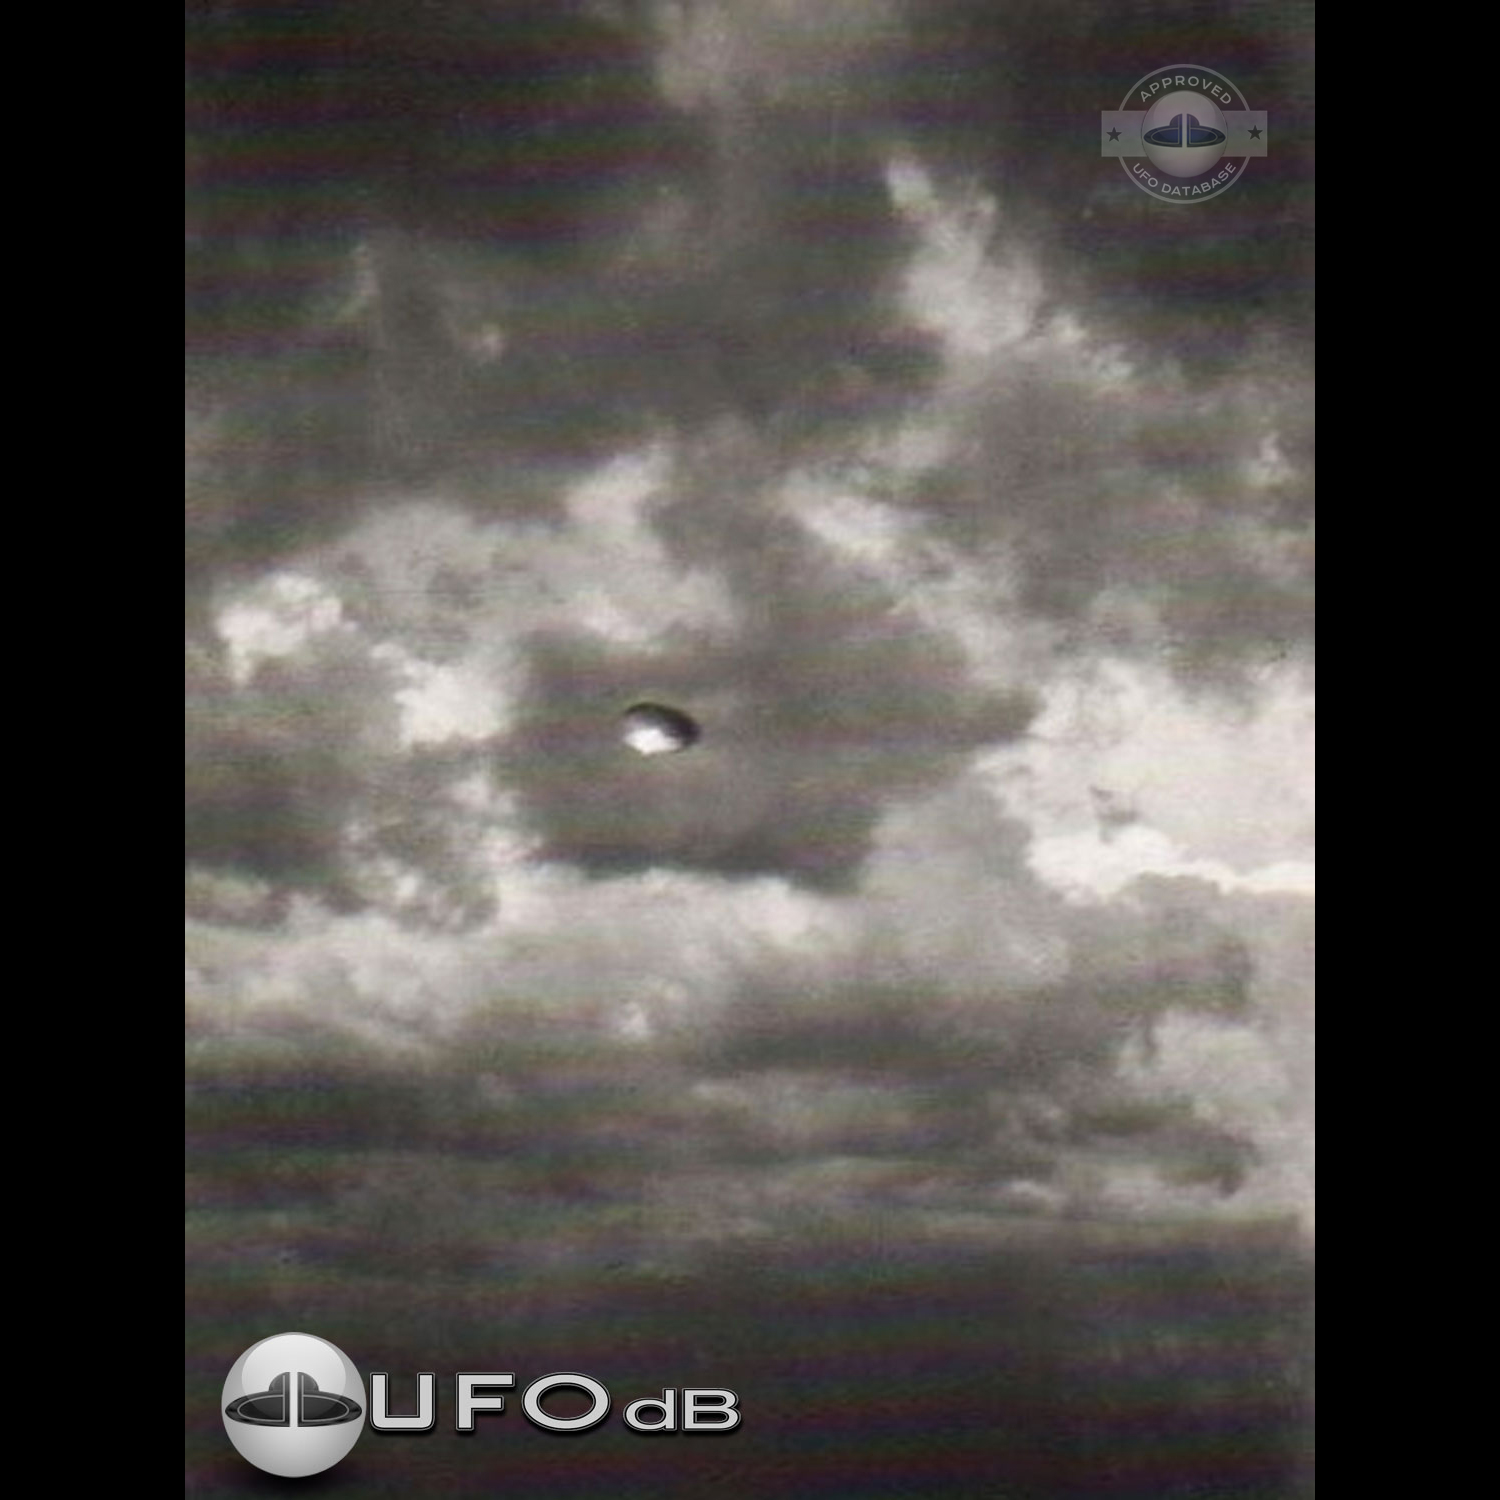 UFO picture of UFO flying over the town of Rosetta in KwaZulu-Natal UFO Picture #32-1